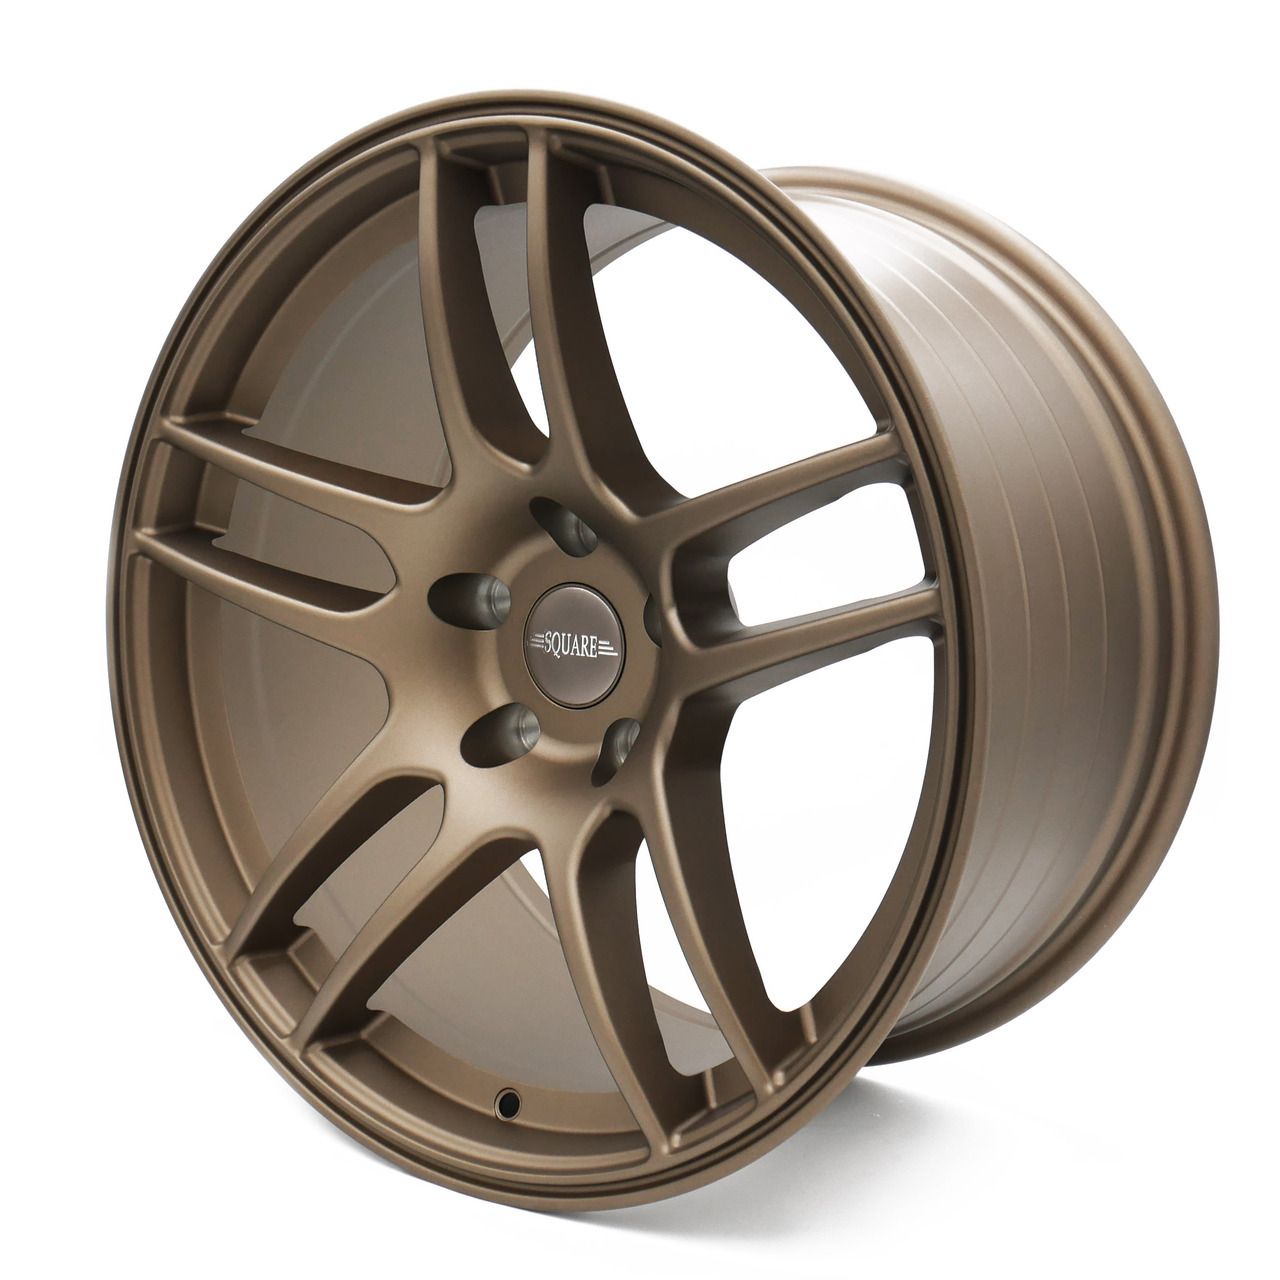 SQUARE Wheels - Flow Formed G33 R Model - 18x10.5 +15 5x114.3 - Textured Bronze